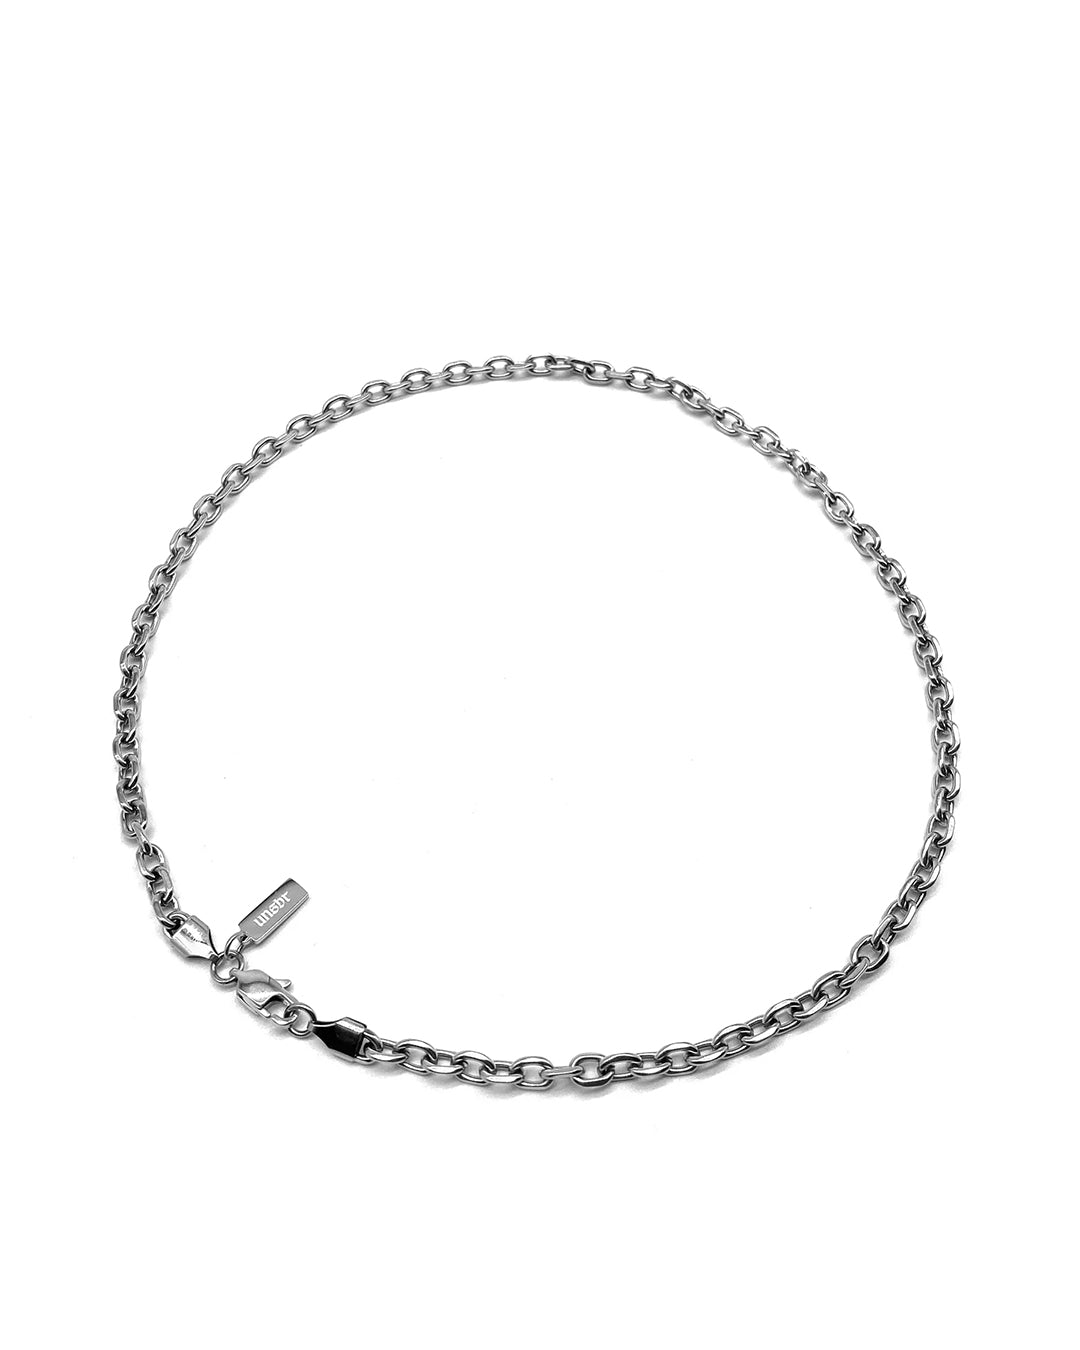 Rogue Chain 5mm (Silver)